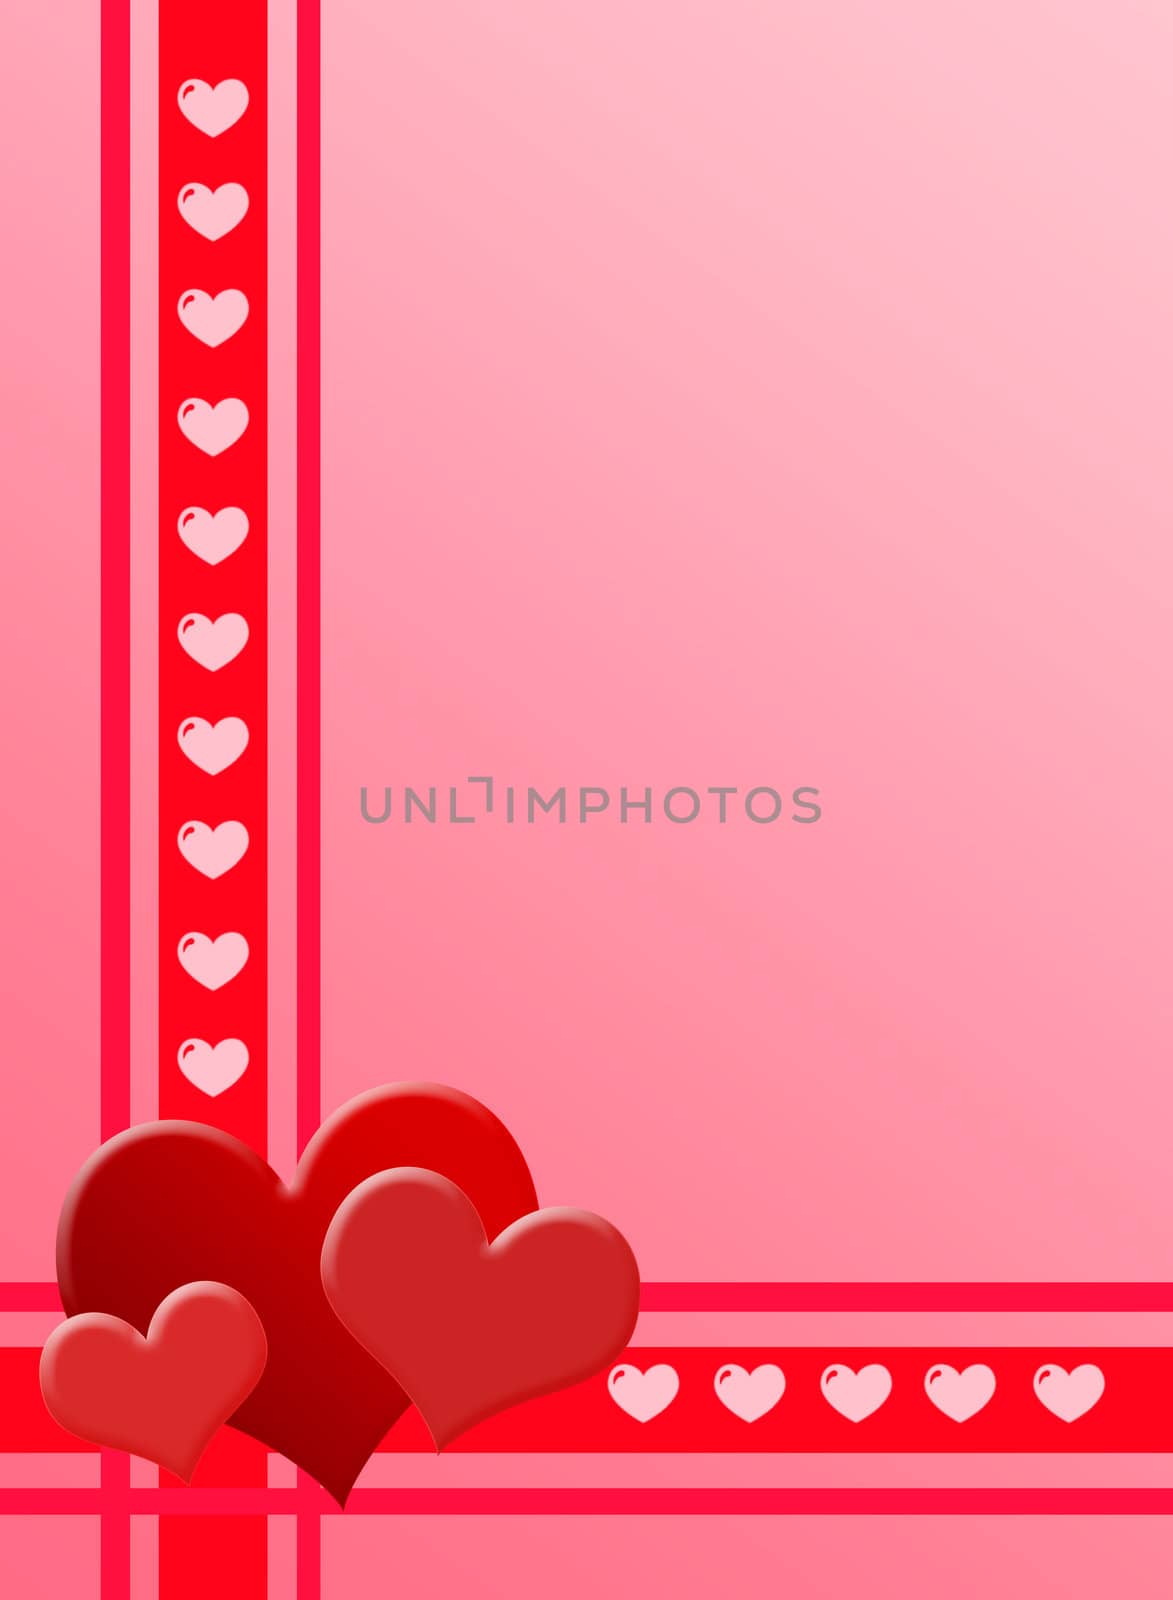 The Valentines day - Card with heart